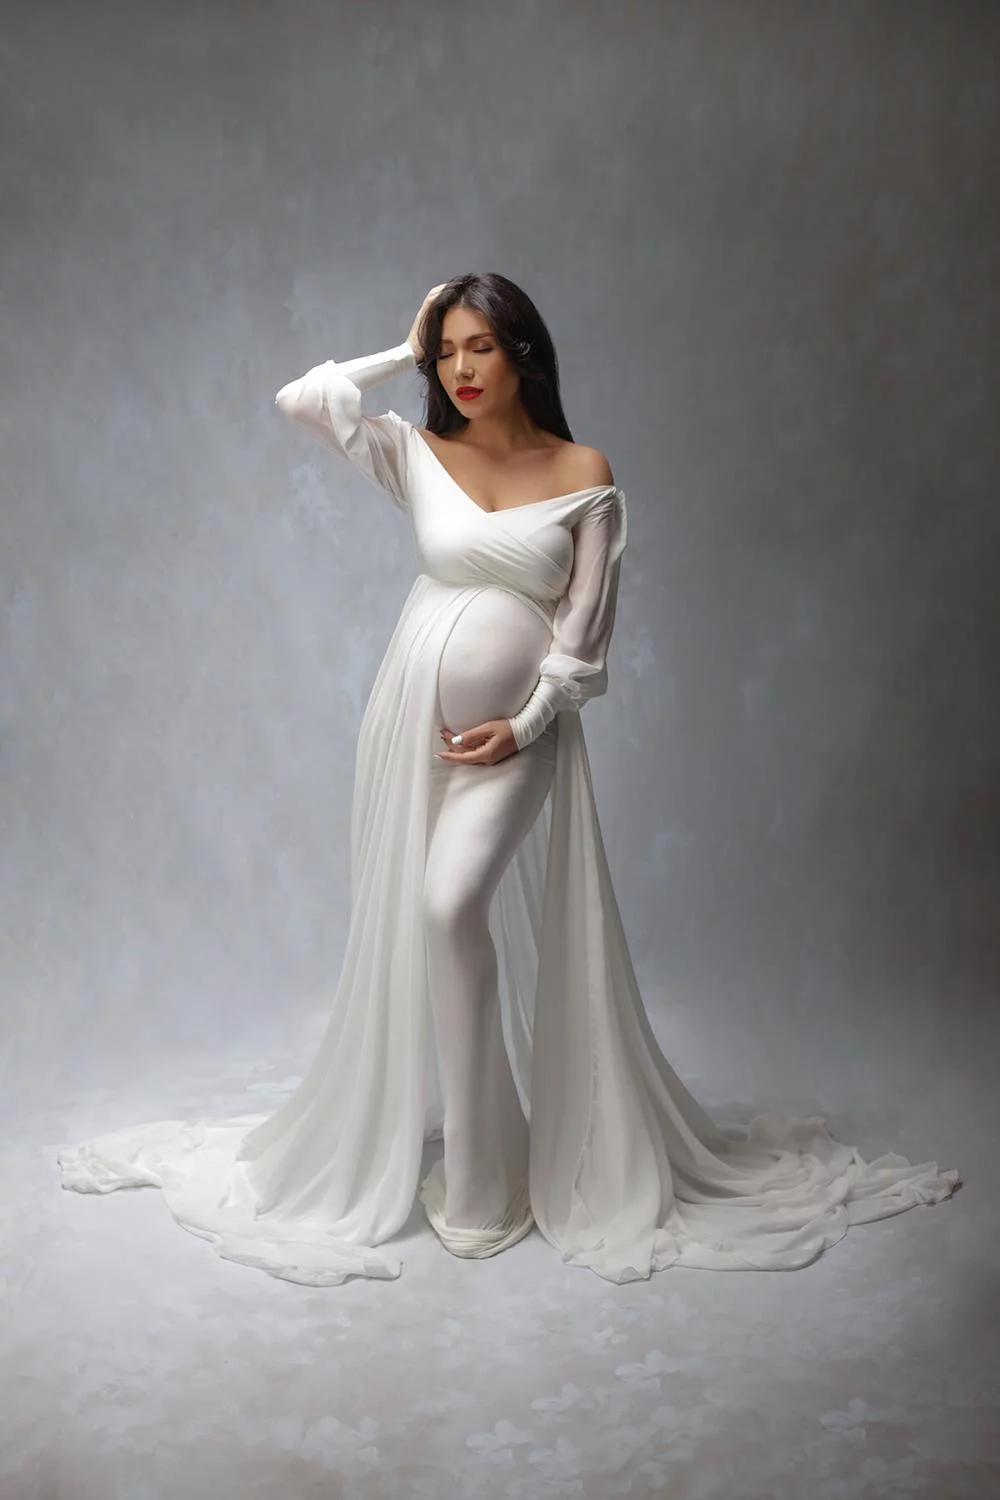 The Best Camera Options For Maternity Shoots